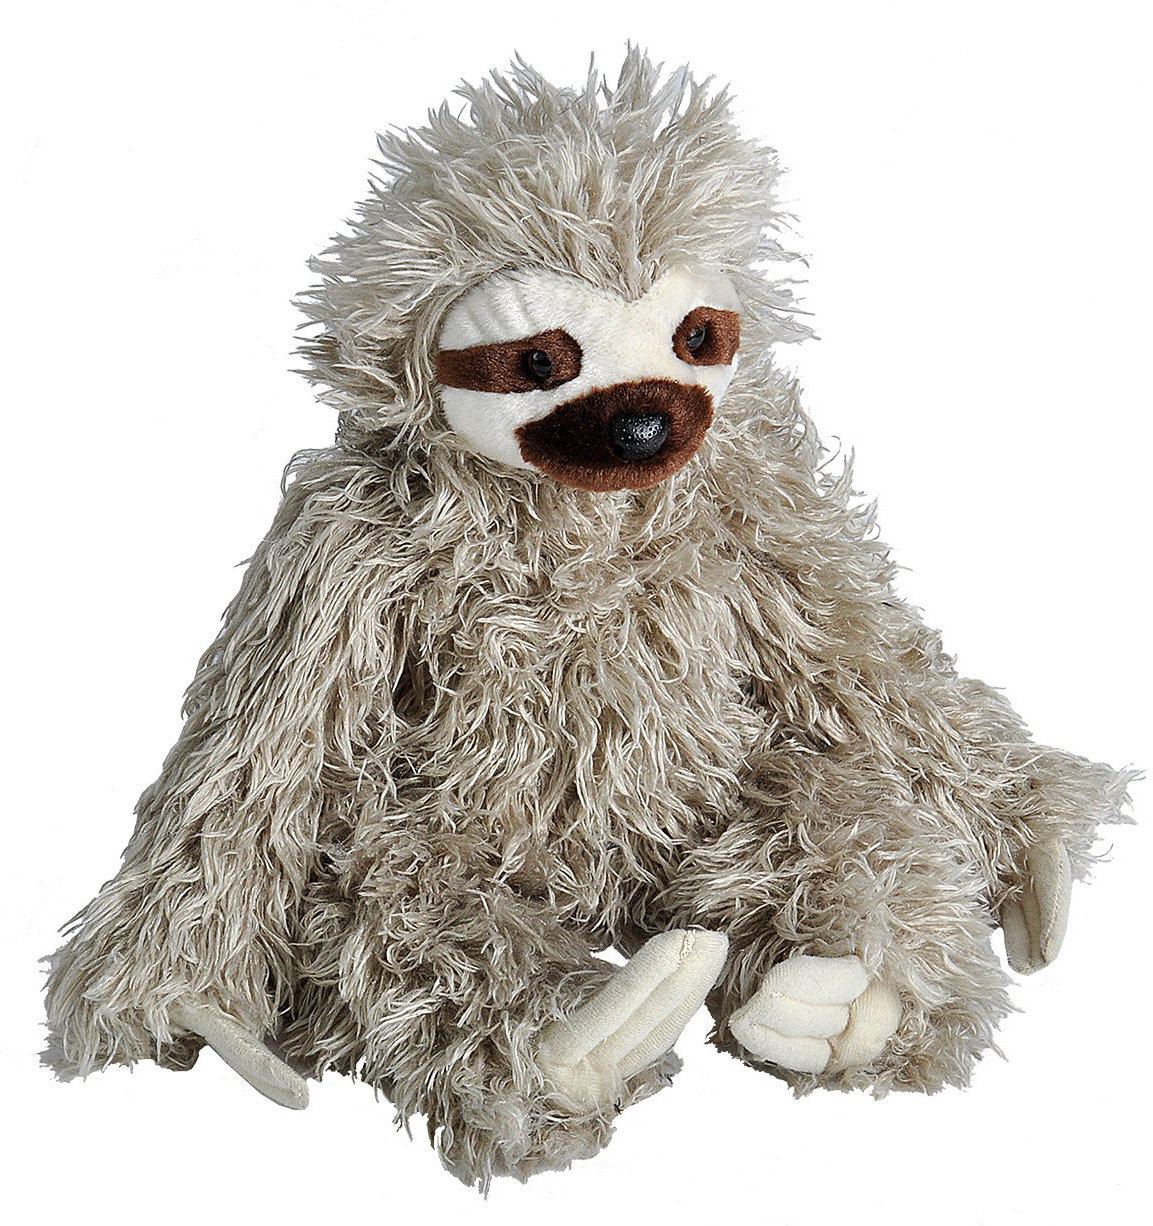 sloth stuffed animal in stores